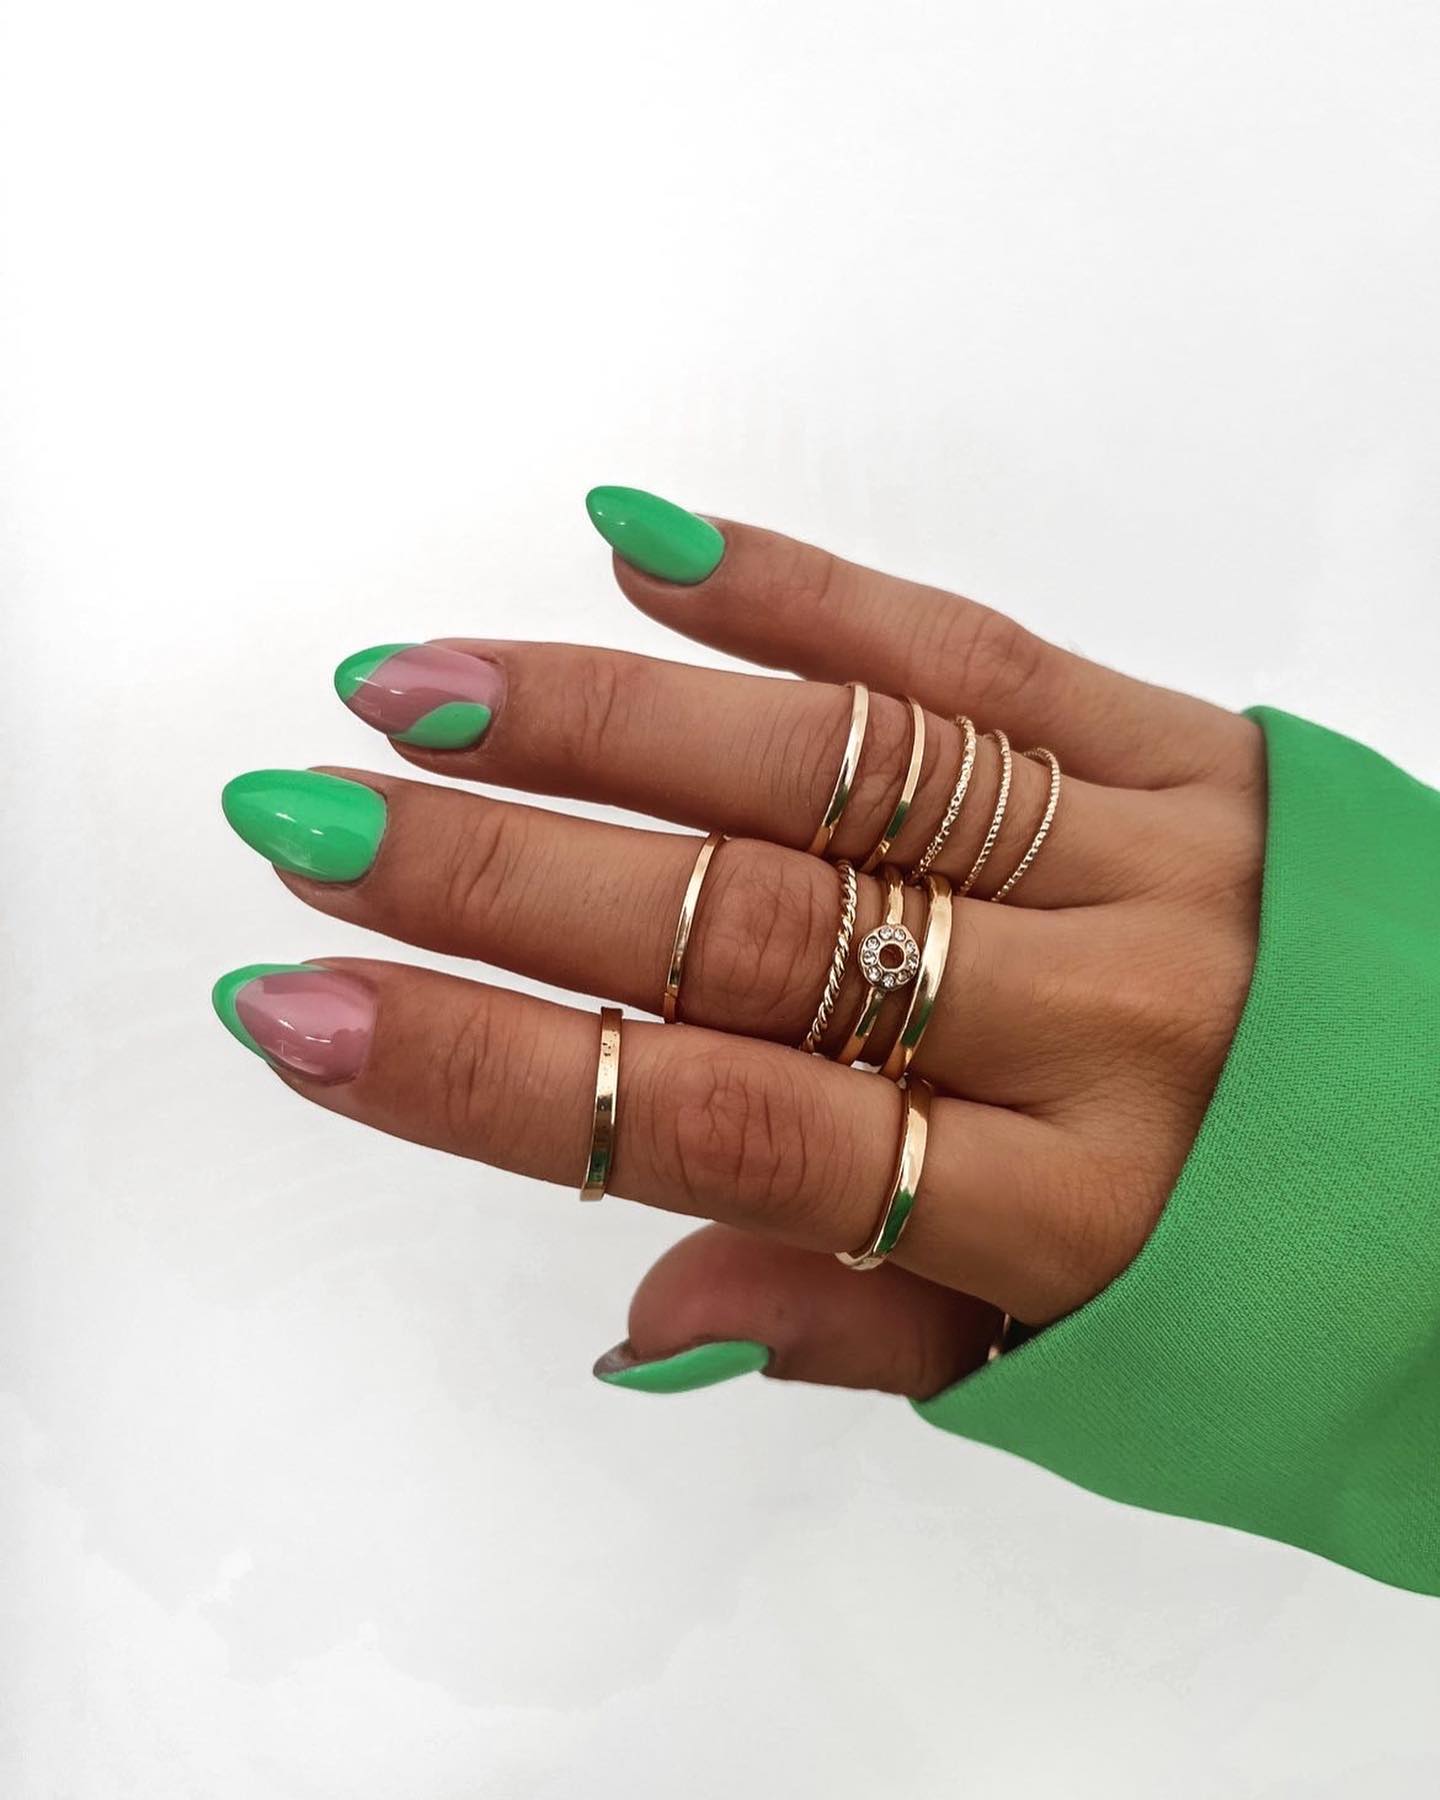 It's just super easy to get this chic look with your almond green nails. Want to try this green nail art to rock?